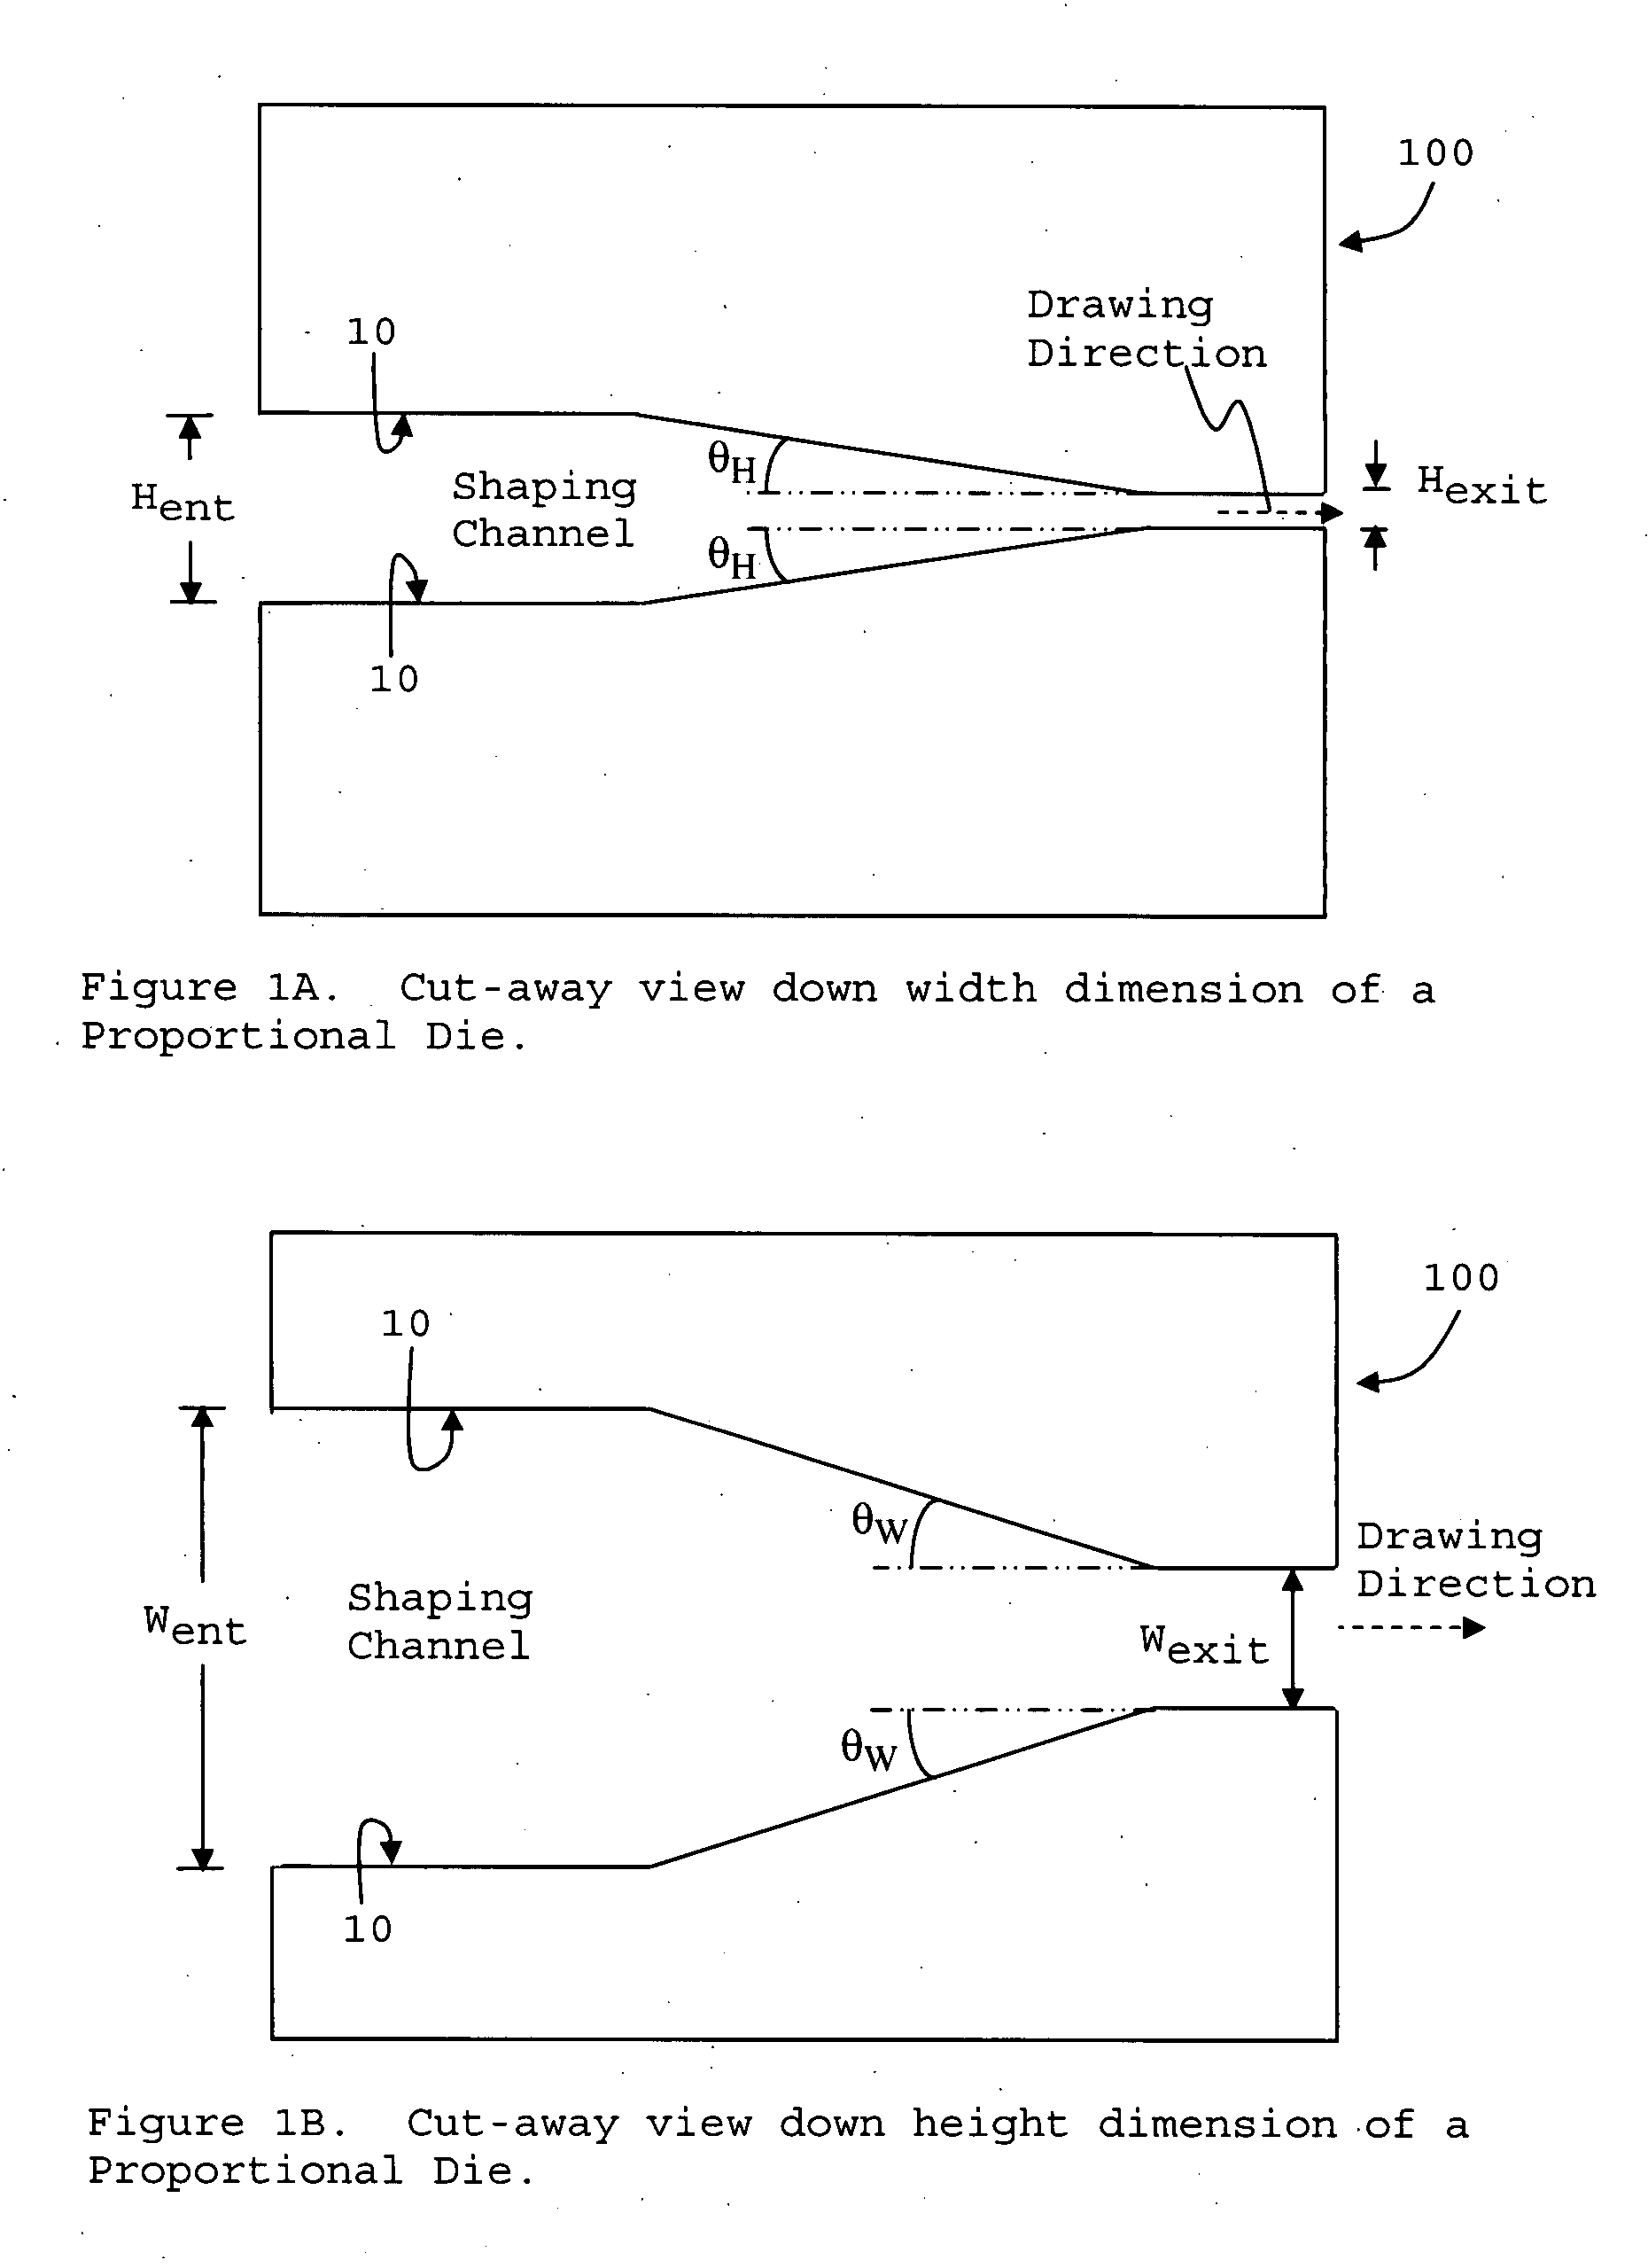 Substantially proportional drawing die for polymer compositions